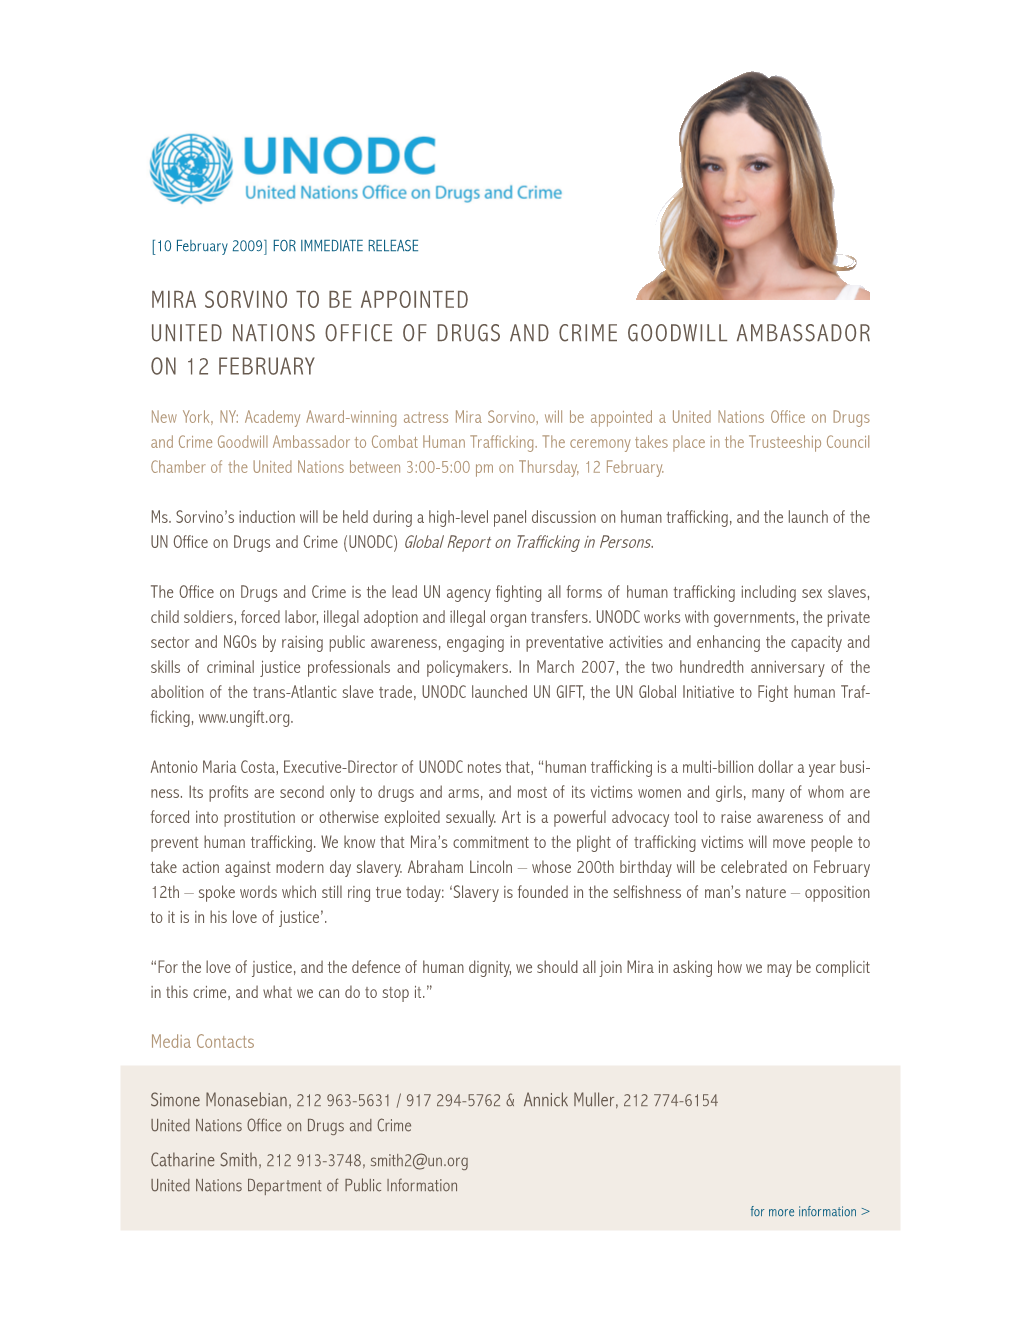 Mira Sorvino to Be Appointed United Nations Office of Drugs and Crime Goodwill Ambassador on 12 February